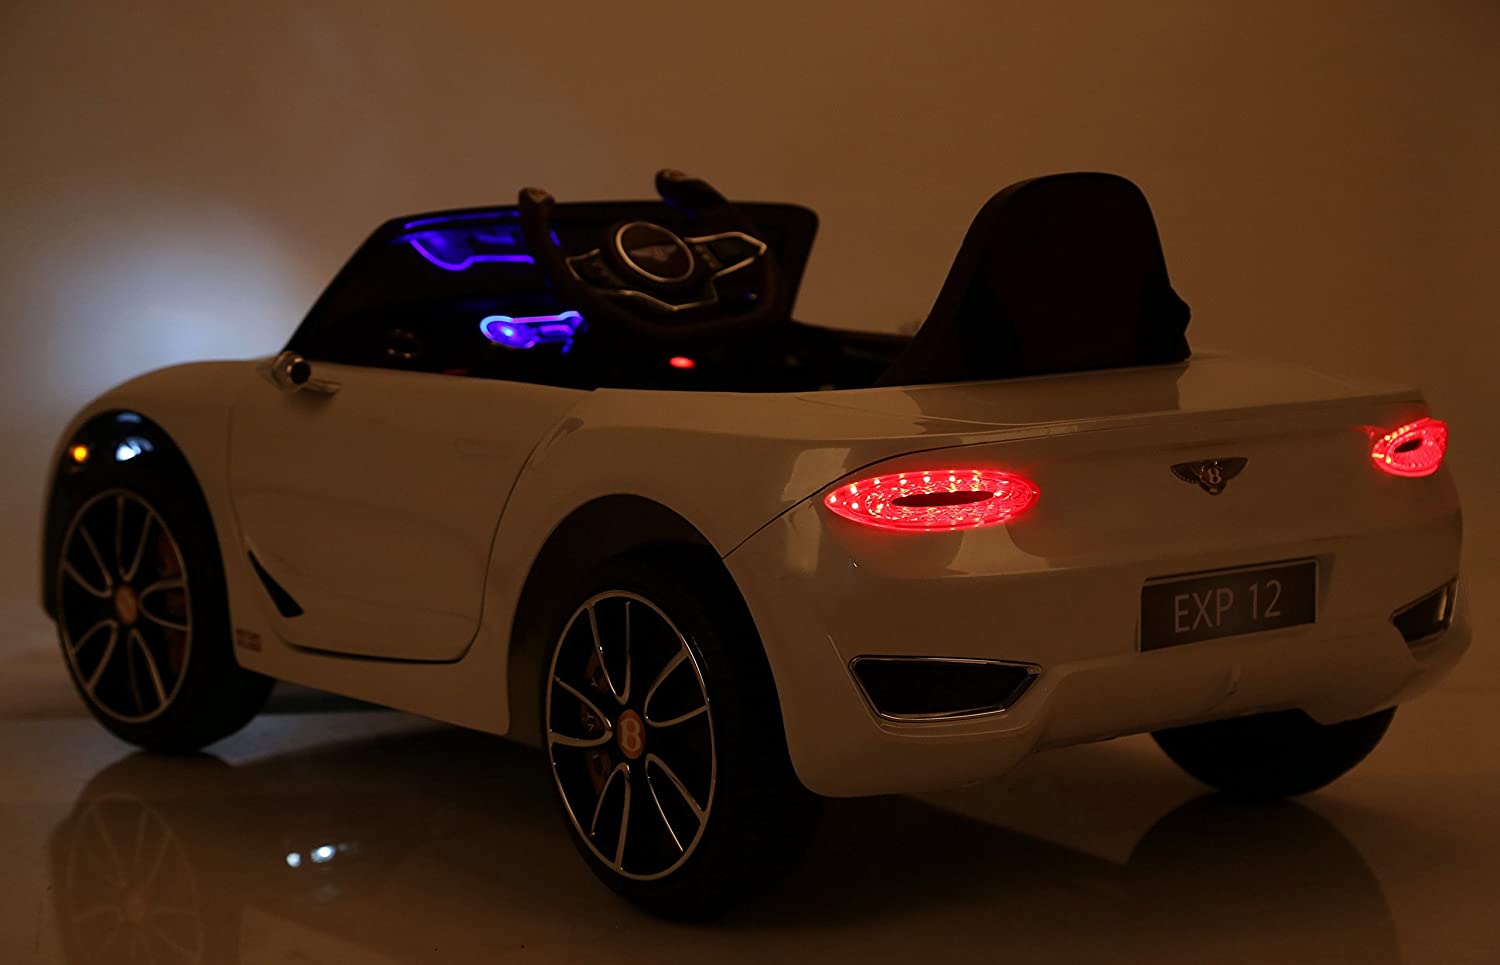 White Bentley GT EXP12 Kids Electric Ride On Car 12 Volt with illuminated interior and tail lights in a low-light setting